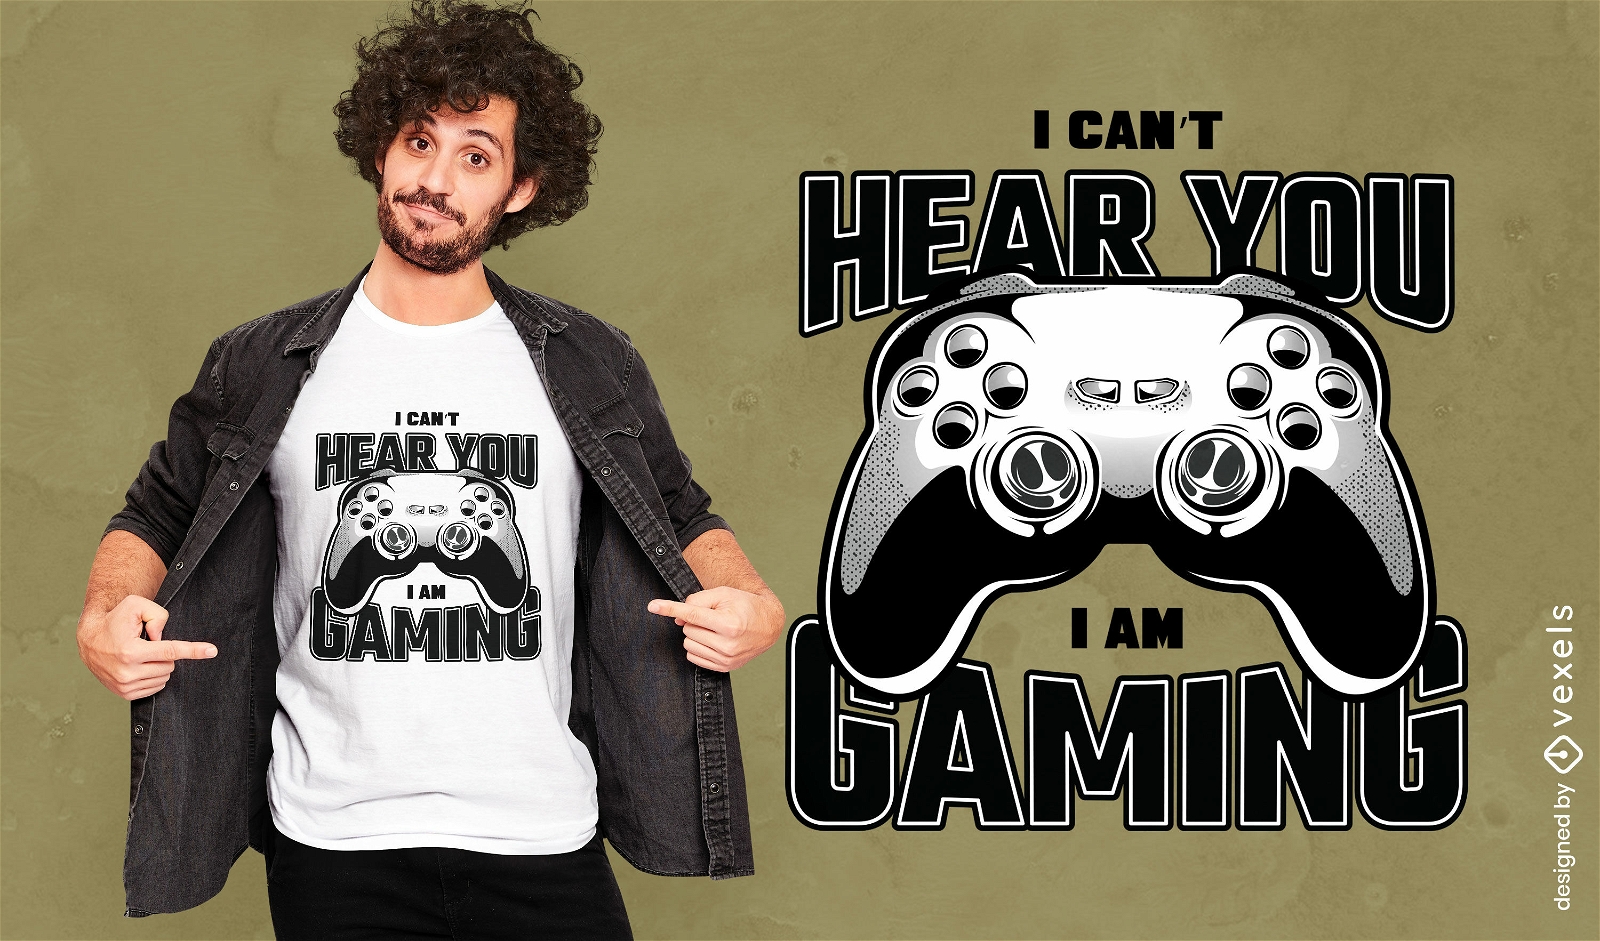 Gaming funny can't hear you quote t-shirt design